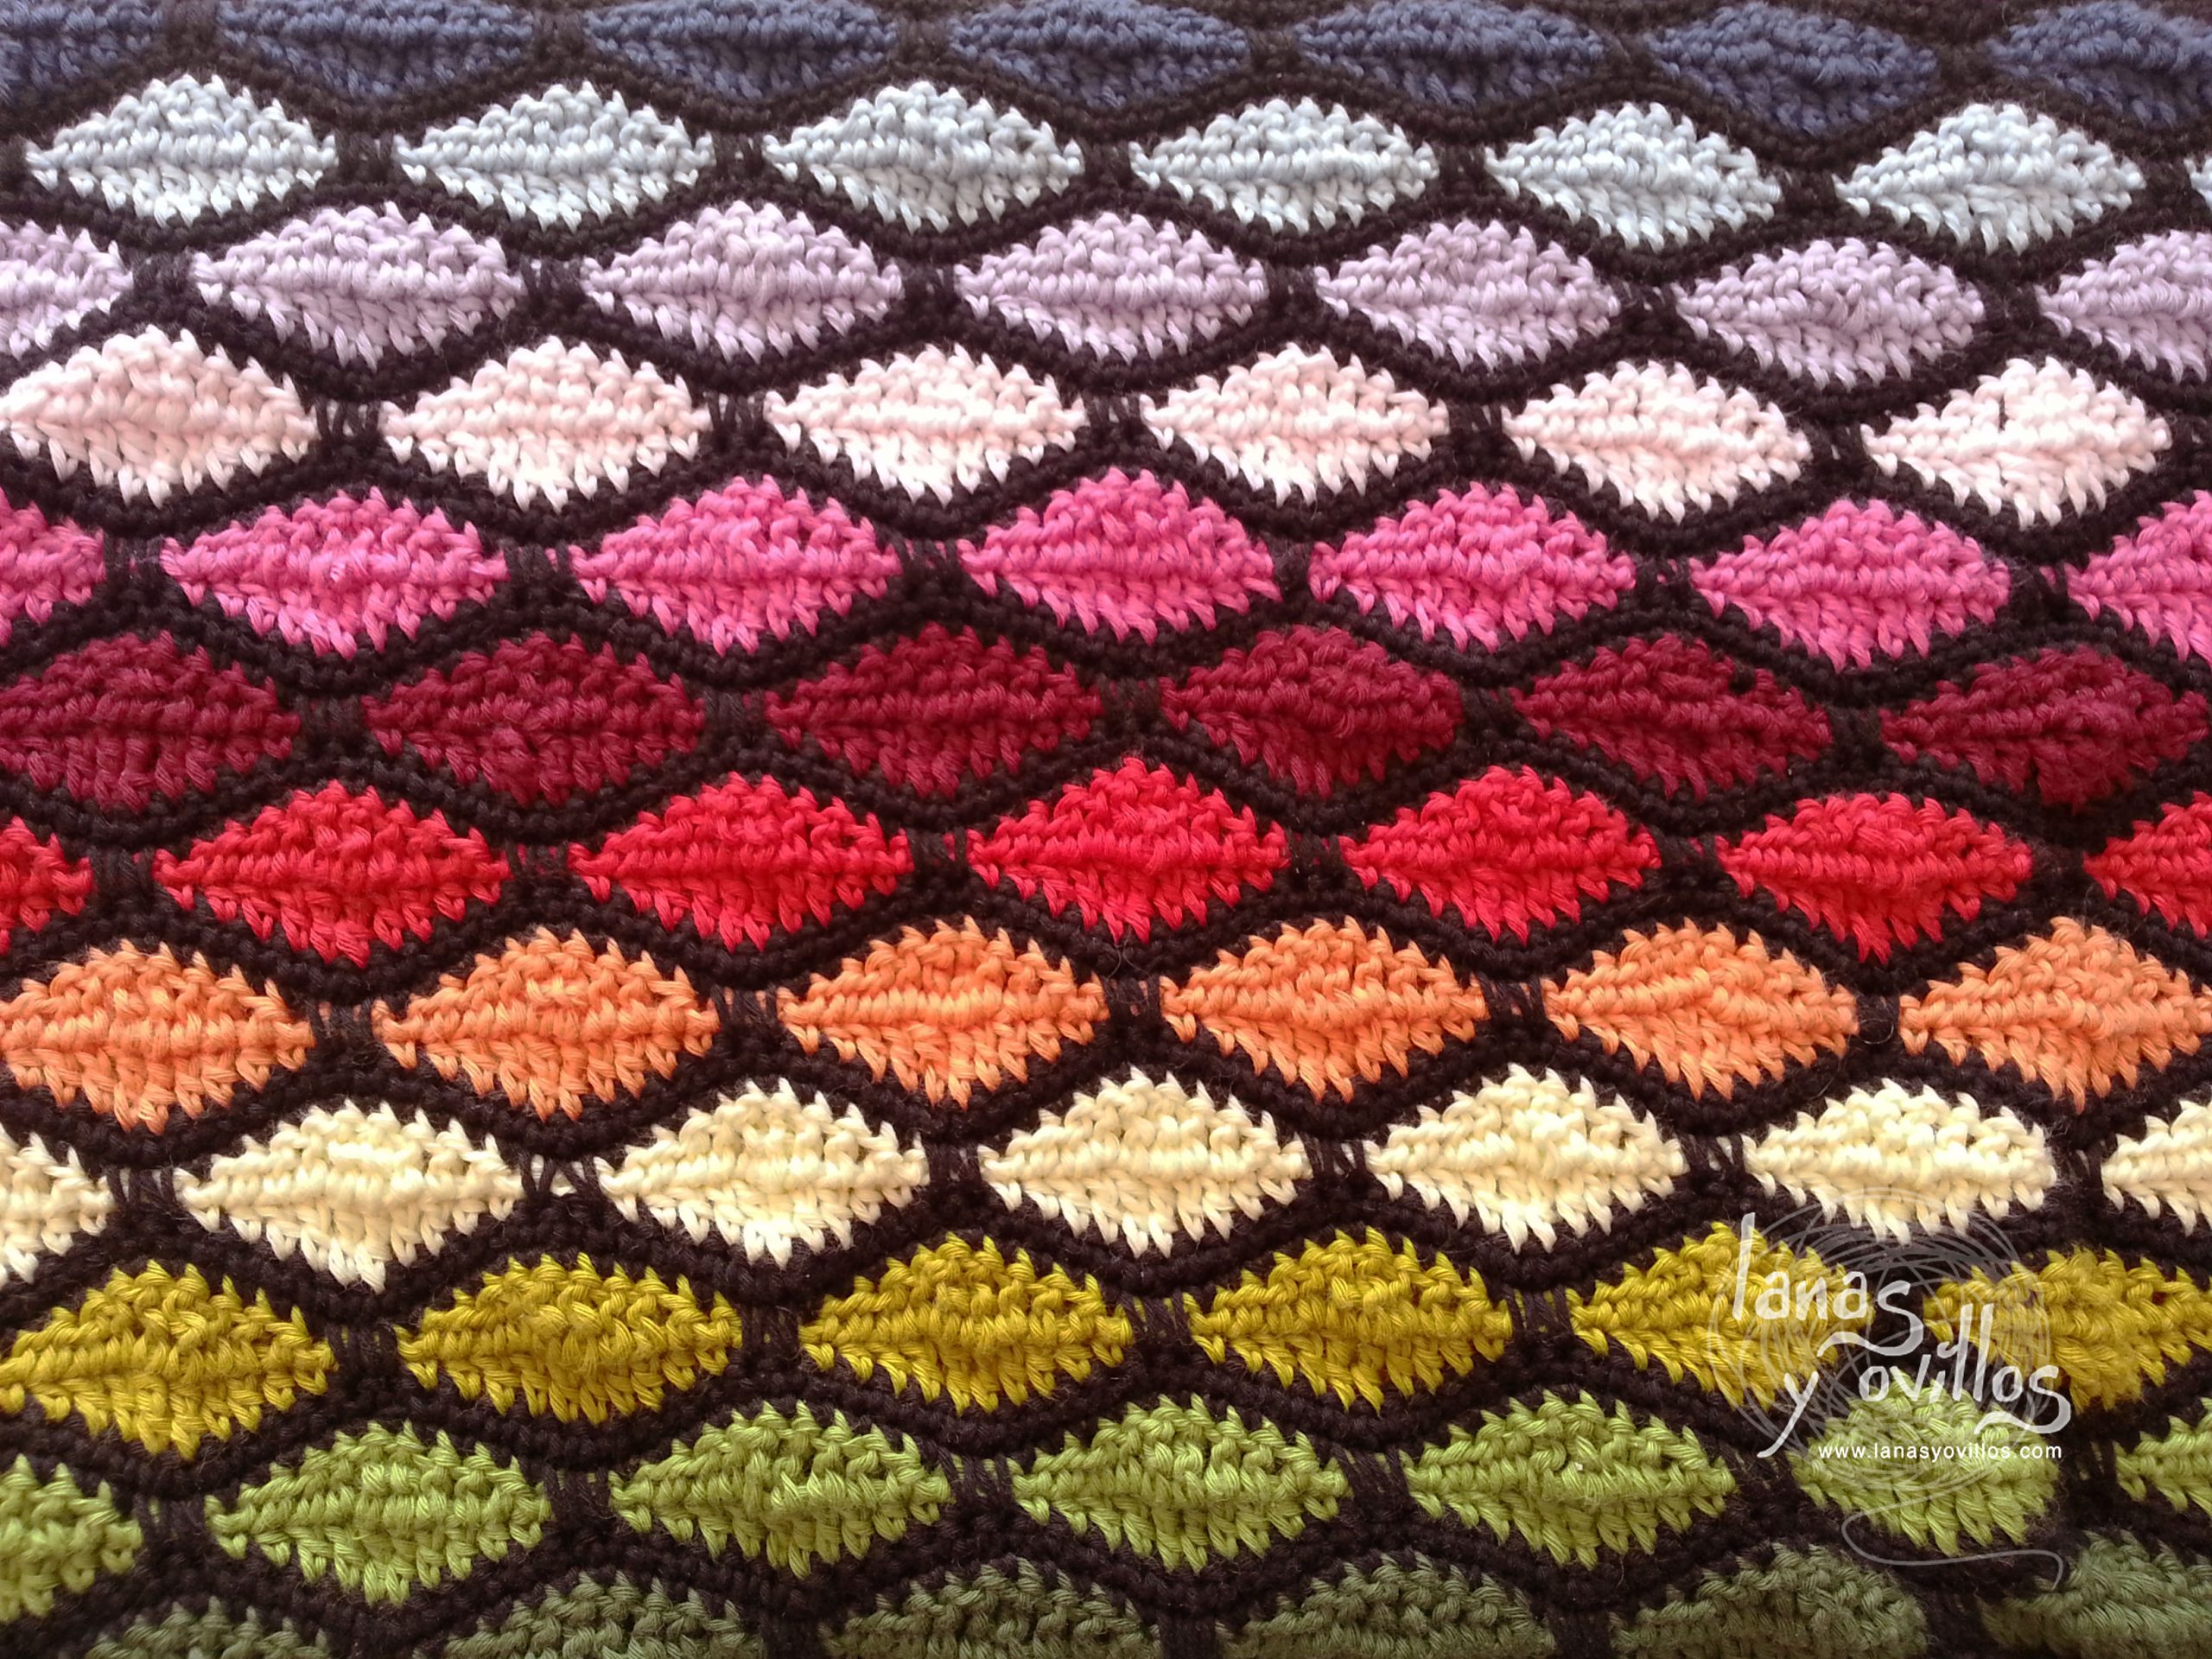 Wave crochet Stitch free pattern with chart and video tutorial